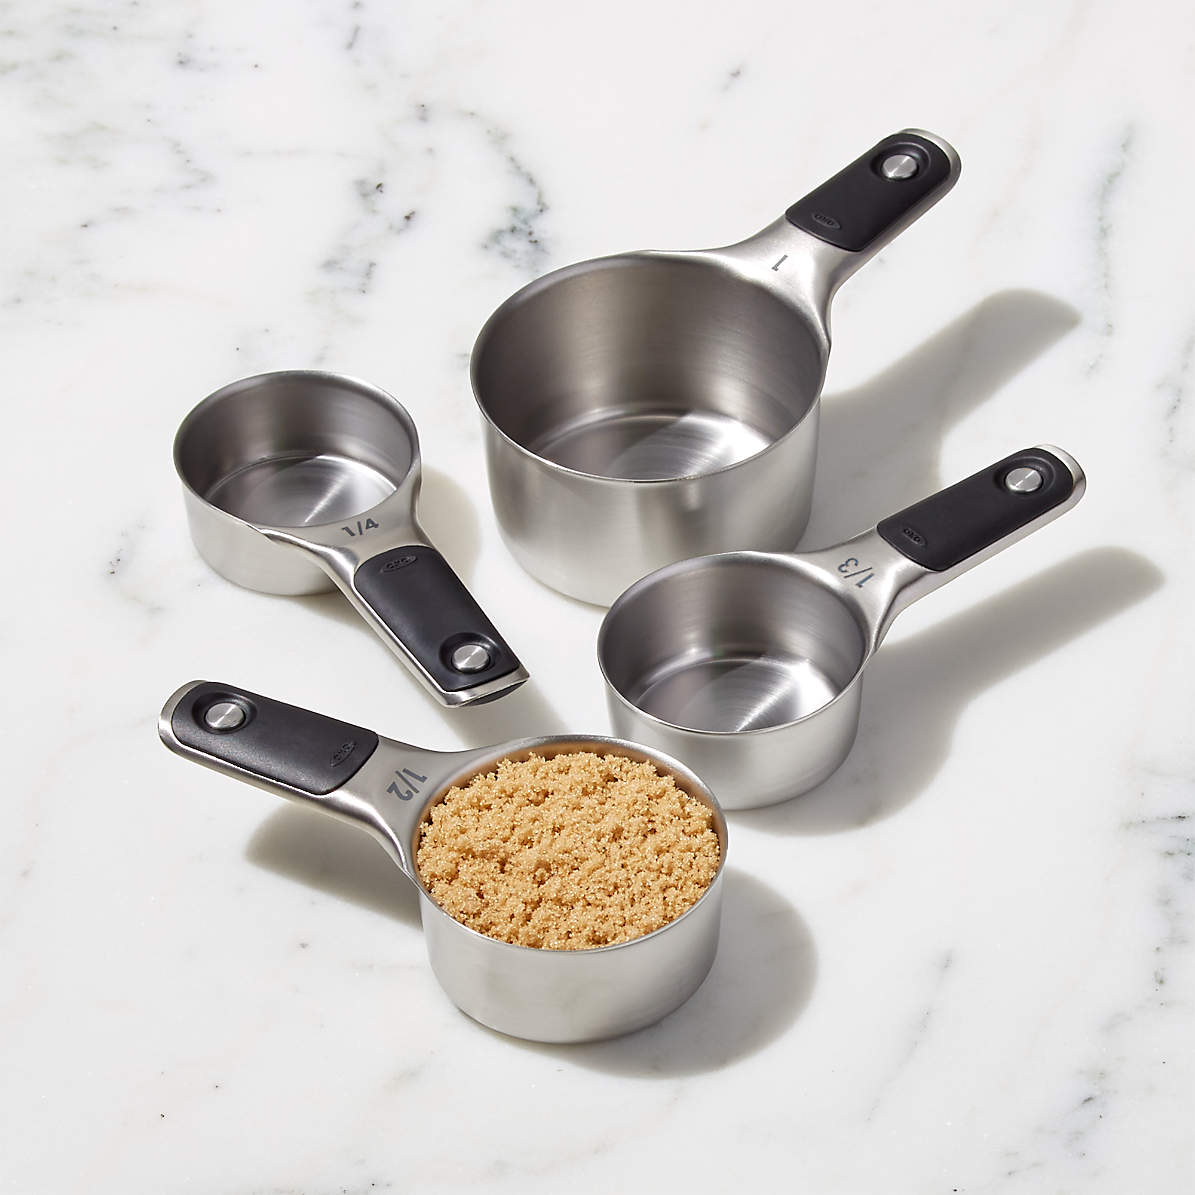 Oxo Magnetic Measuring Cups Set Of 4 Reviews Crate And Barrel